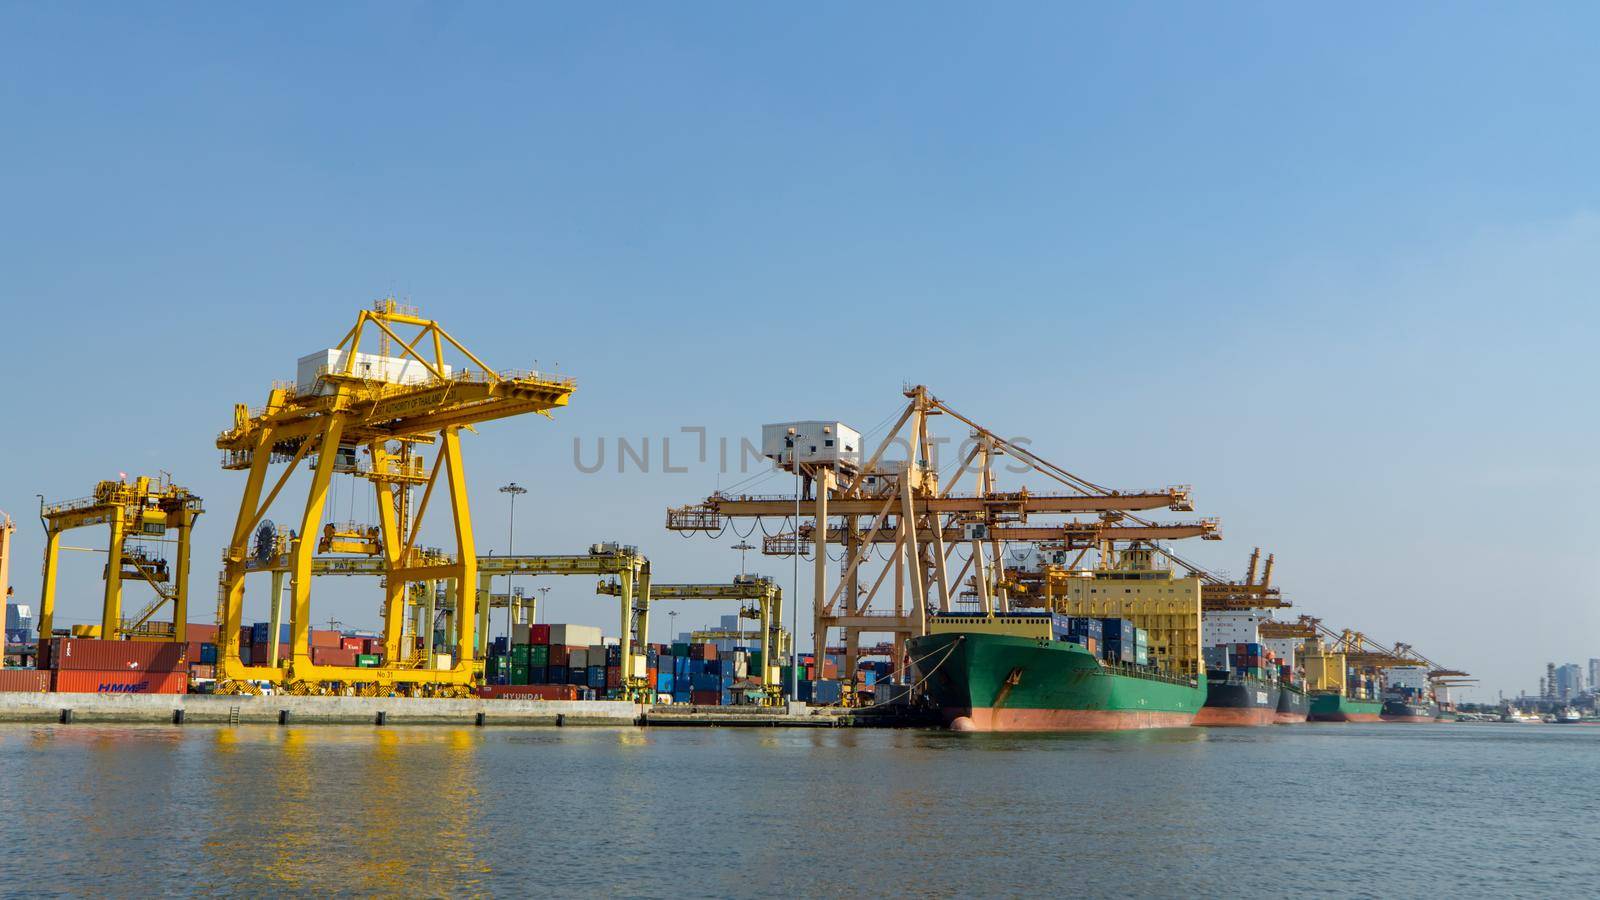 Logistics and transportation of Container Cargo ship and Cargo plane with working crane bridge in shipyard at sunrise, logistic import export and transport industry background by chuanchai